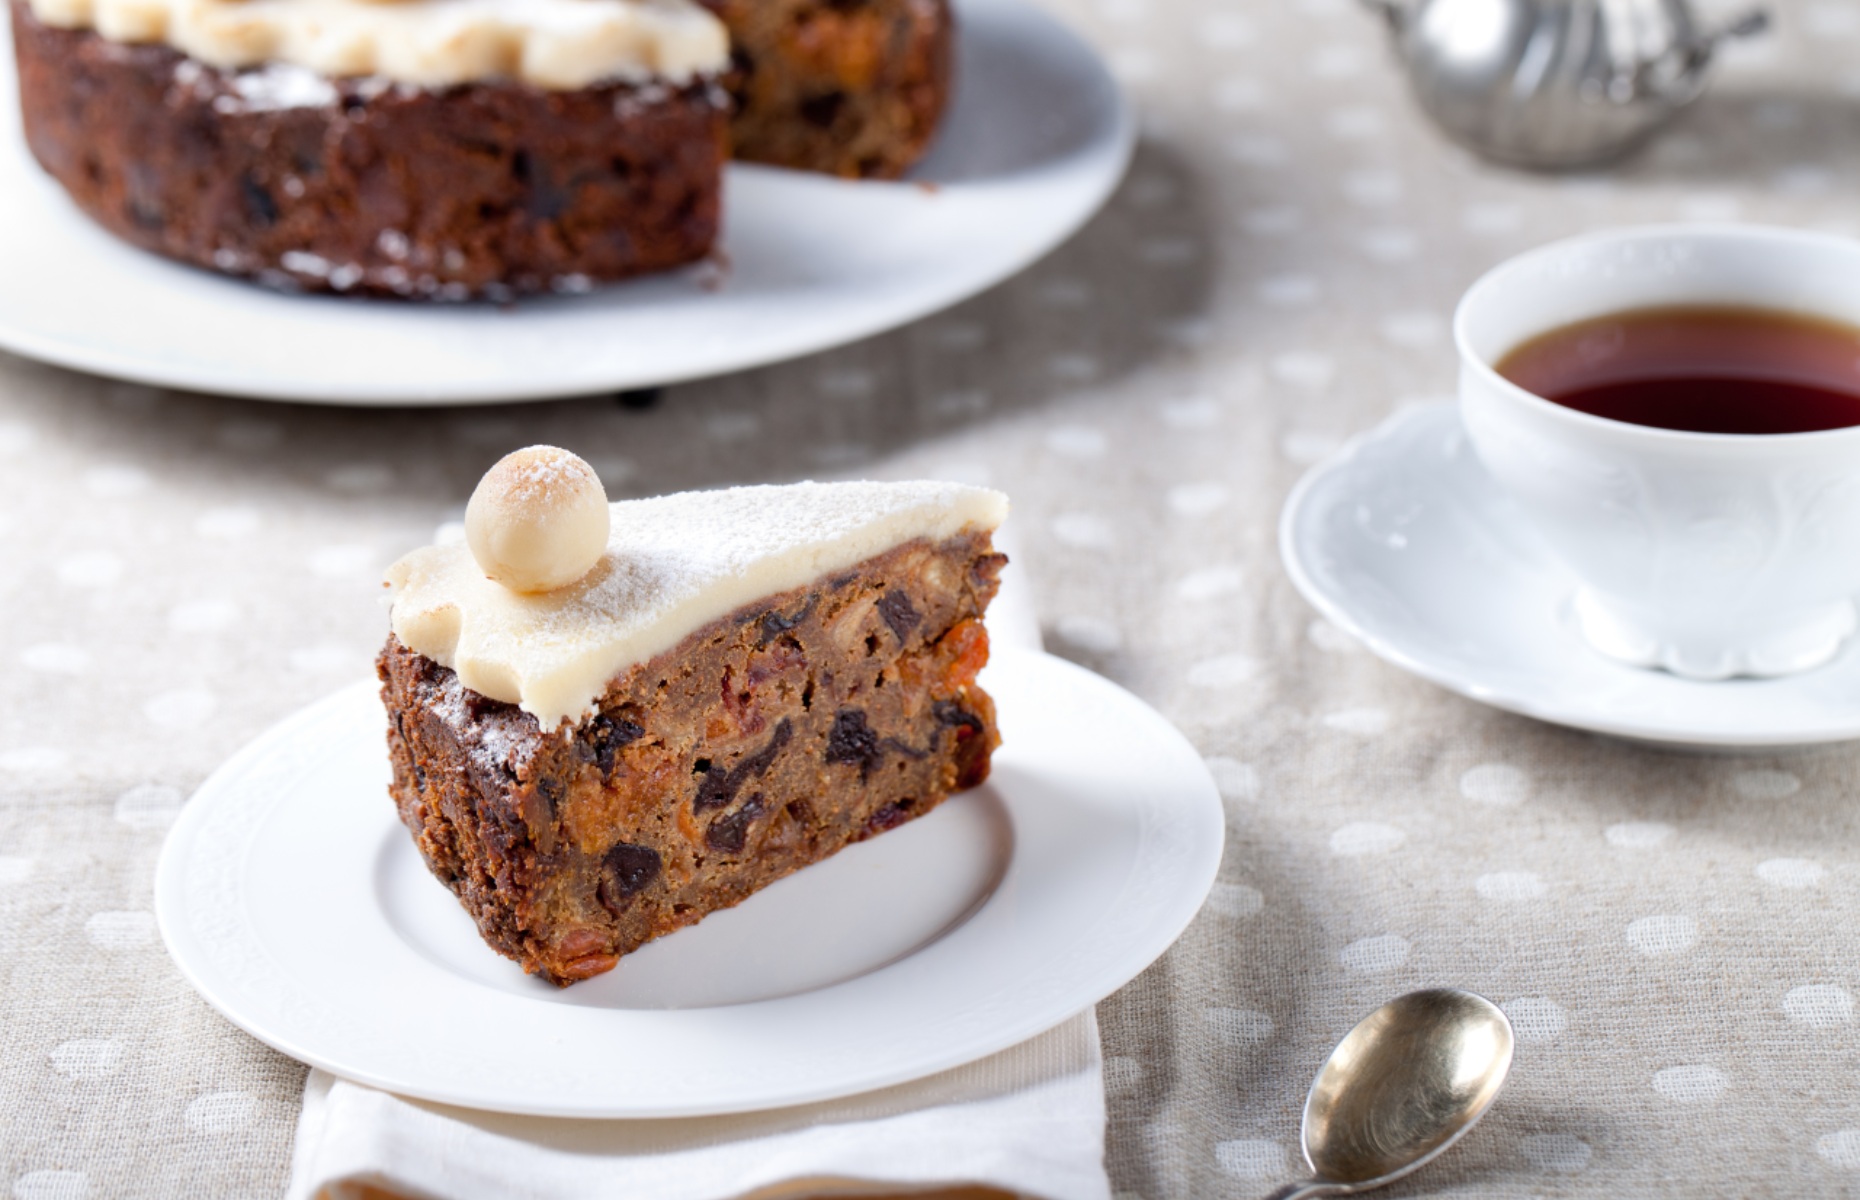 A slice of Simnel cake with marzipan decorations (Image: Anna_Pustynnikova/Shutterstock)